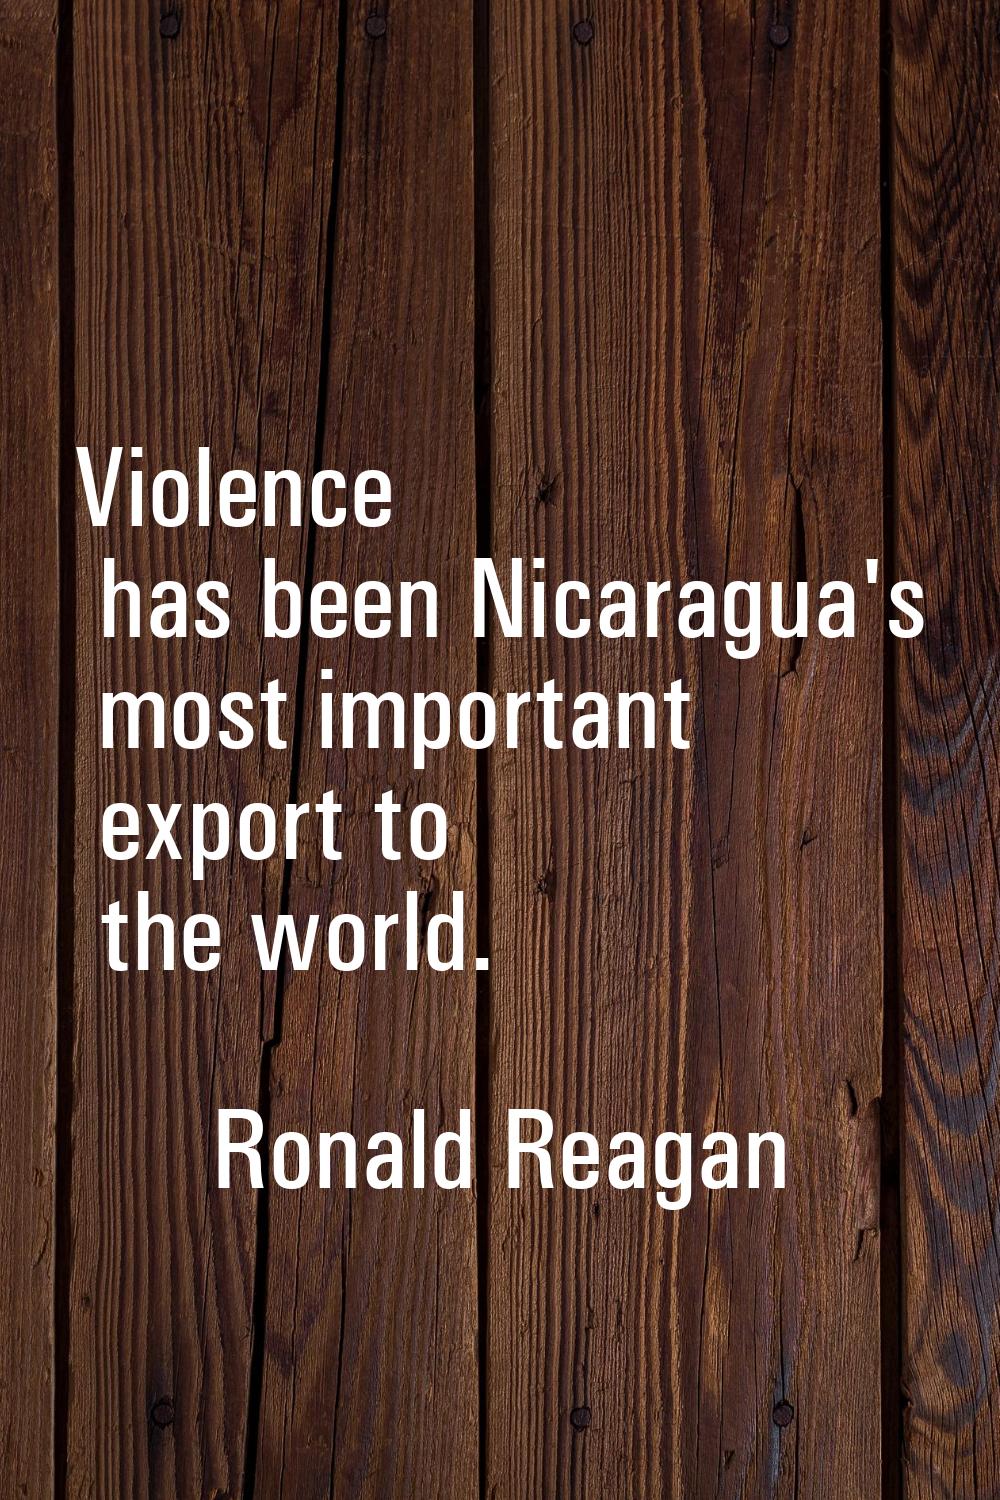 Violence has been Nicaragua's most important export to the world.